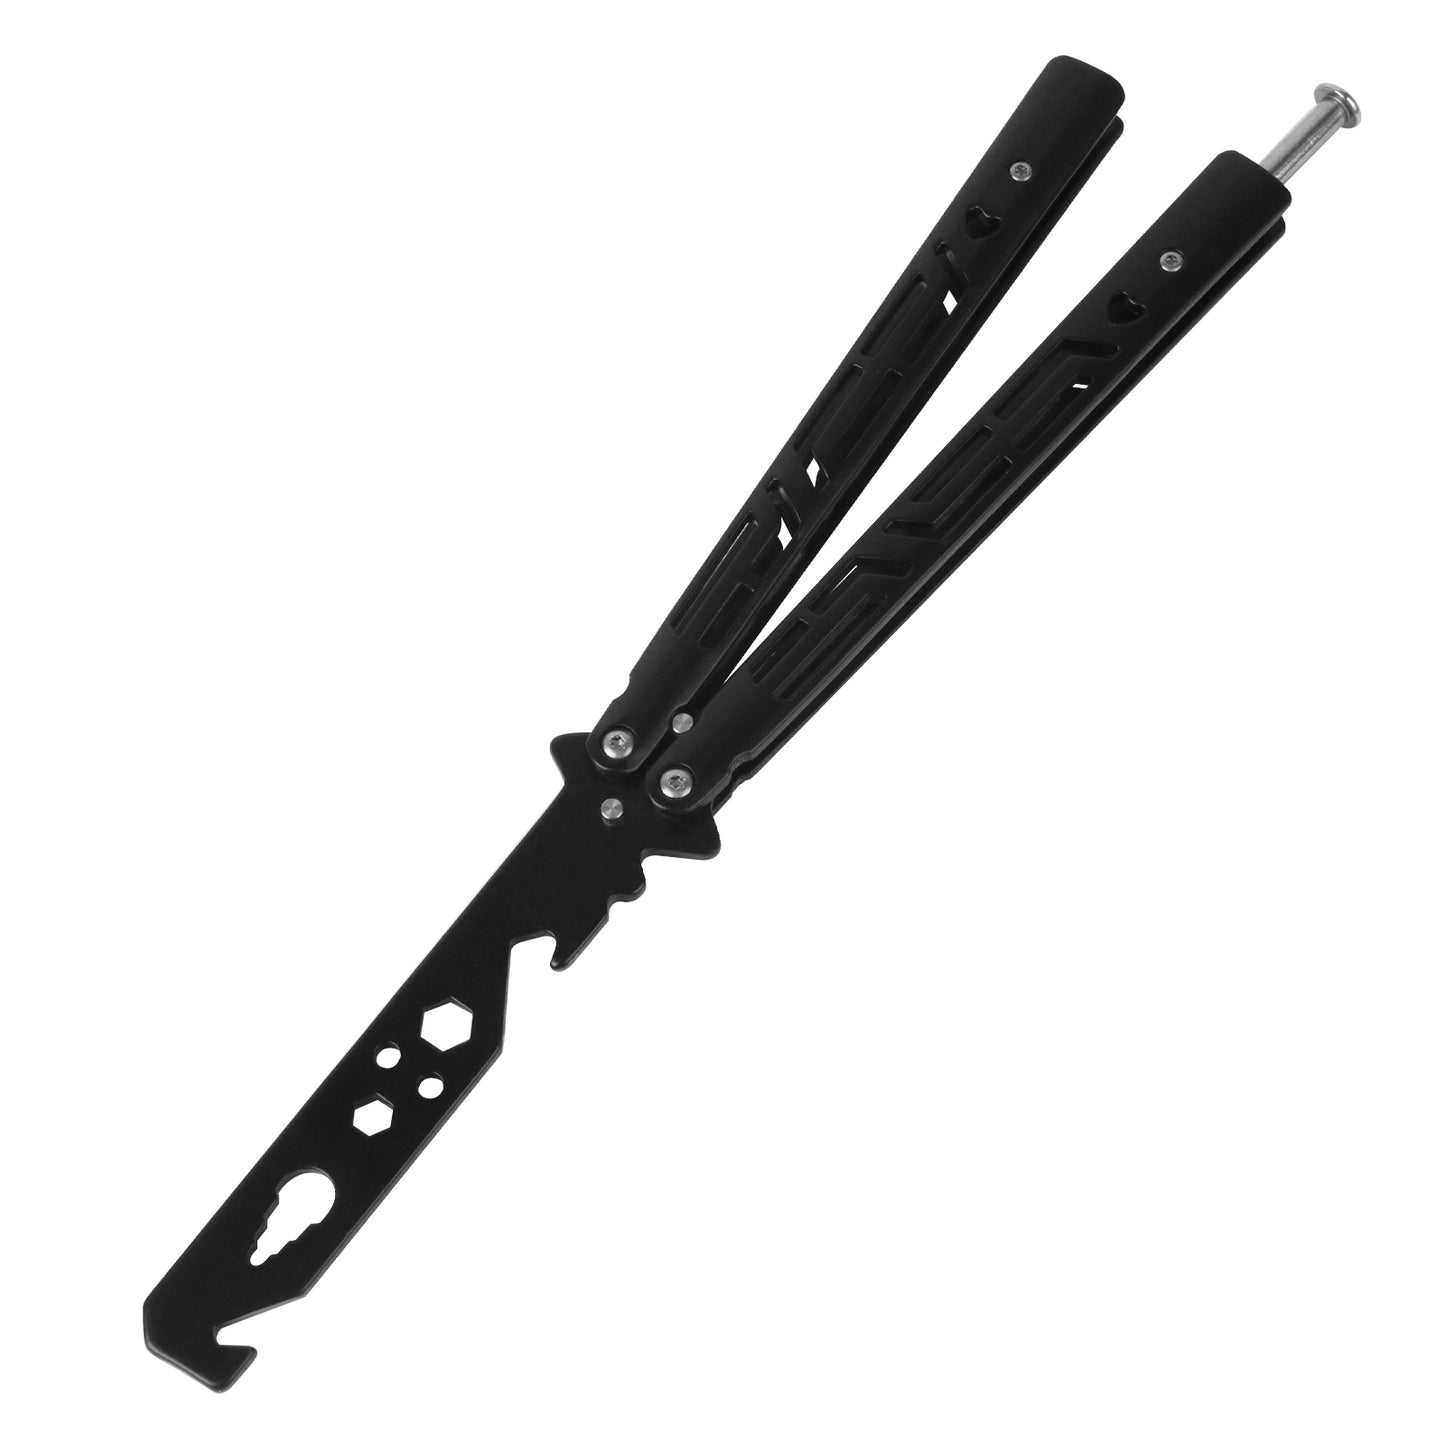 Andux Balisong Butterfly Knife Bottle Opener Tool Stainless Steel Carry-on Hook Folding Multitool BLCS551